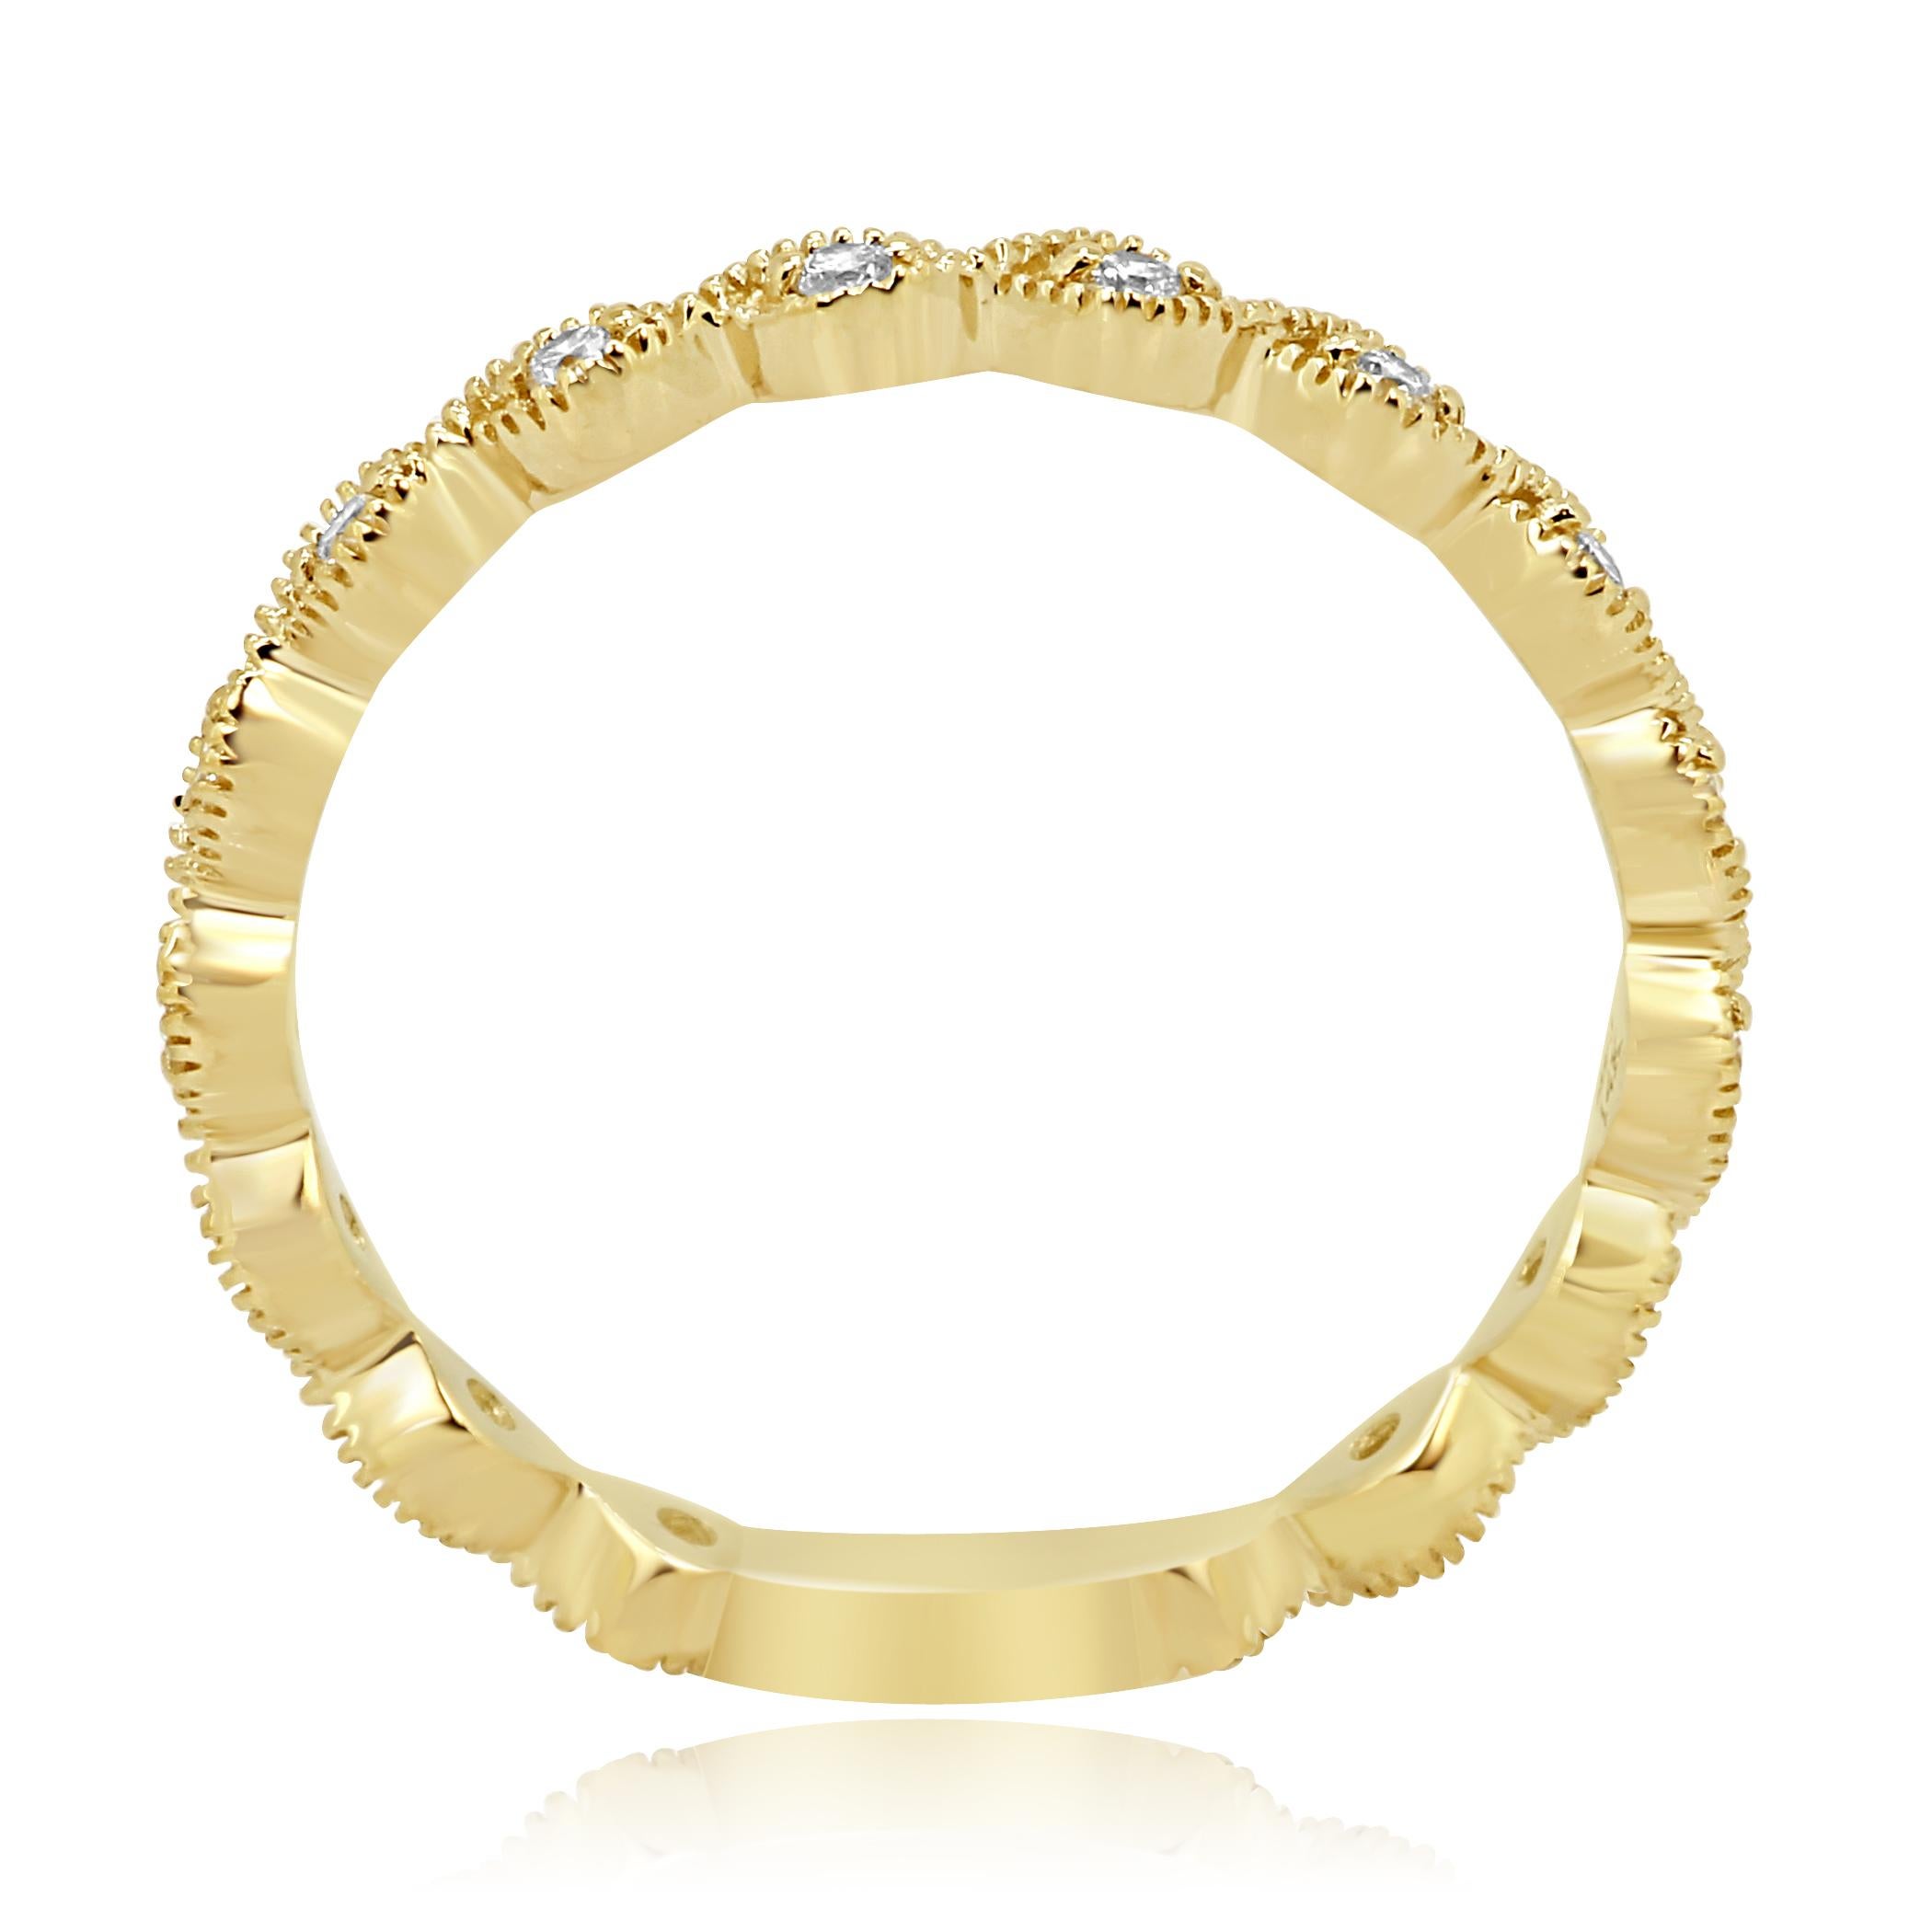 Round Cut White Diamond Rounds Milgrain Gold Eternity Band Fashion Stackable Cocktail Ring